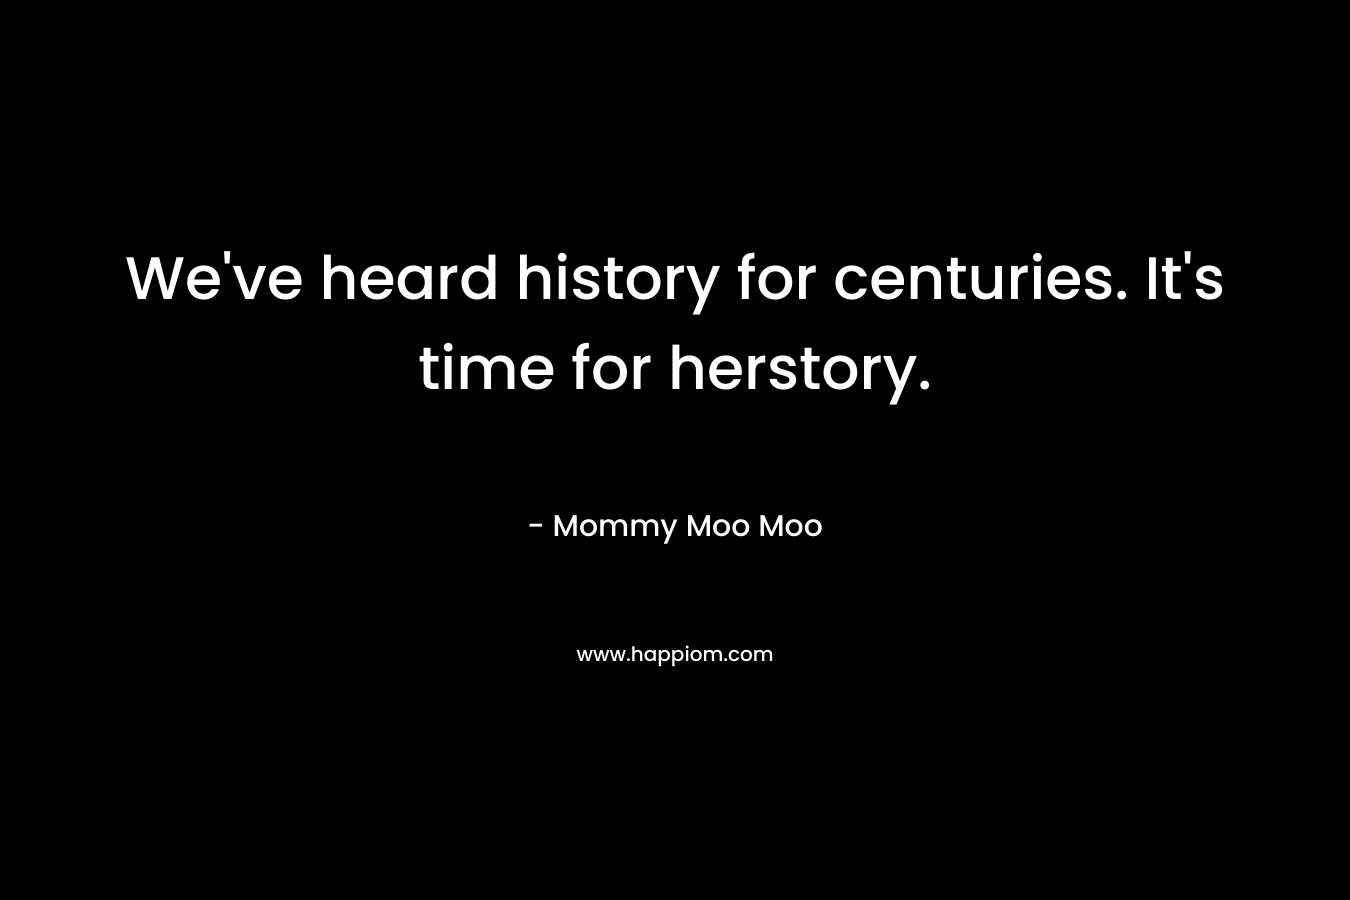 We've heard history for centuries. It's time for herstory.